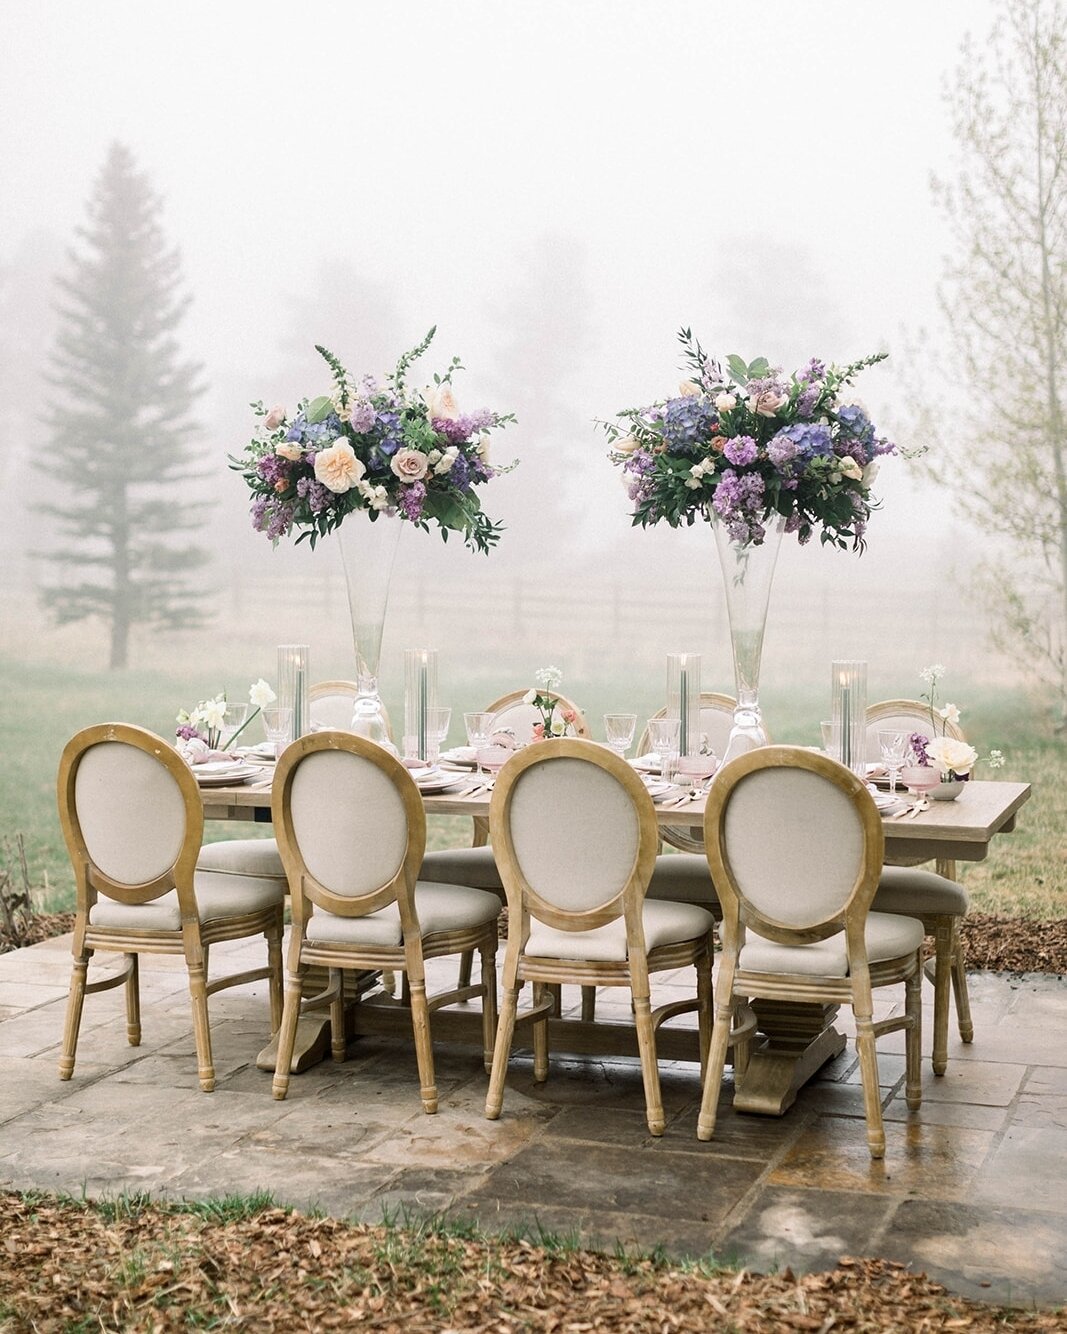 Needing some inspiration for your 2025 spring wedding? Here you go! Spring has the best blooms, promise! Lilacs, narcissus, &amp; hellebore, oh my! So good my friends. 

#coloradowedding #coloradoweddingflorist #coloradoflorist #mountainwedding #moun